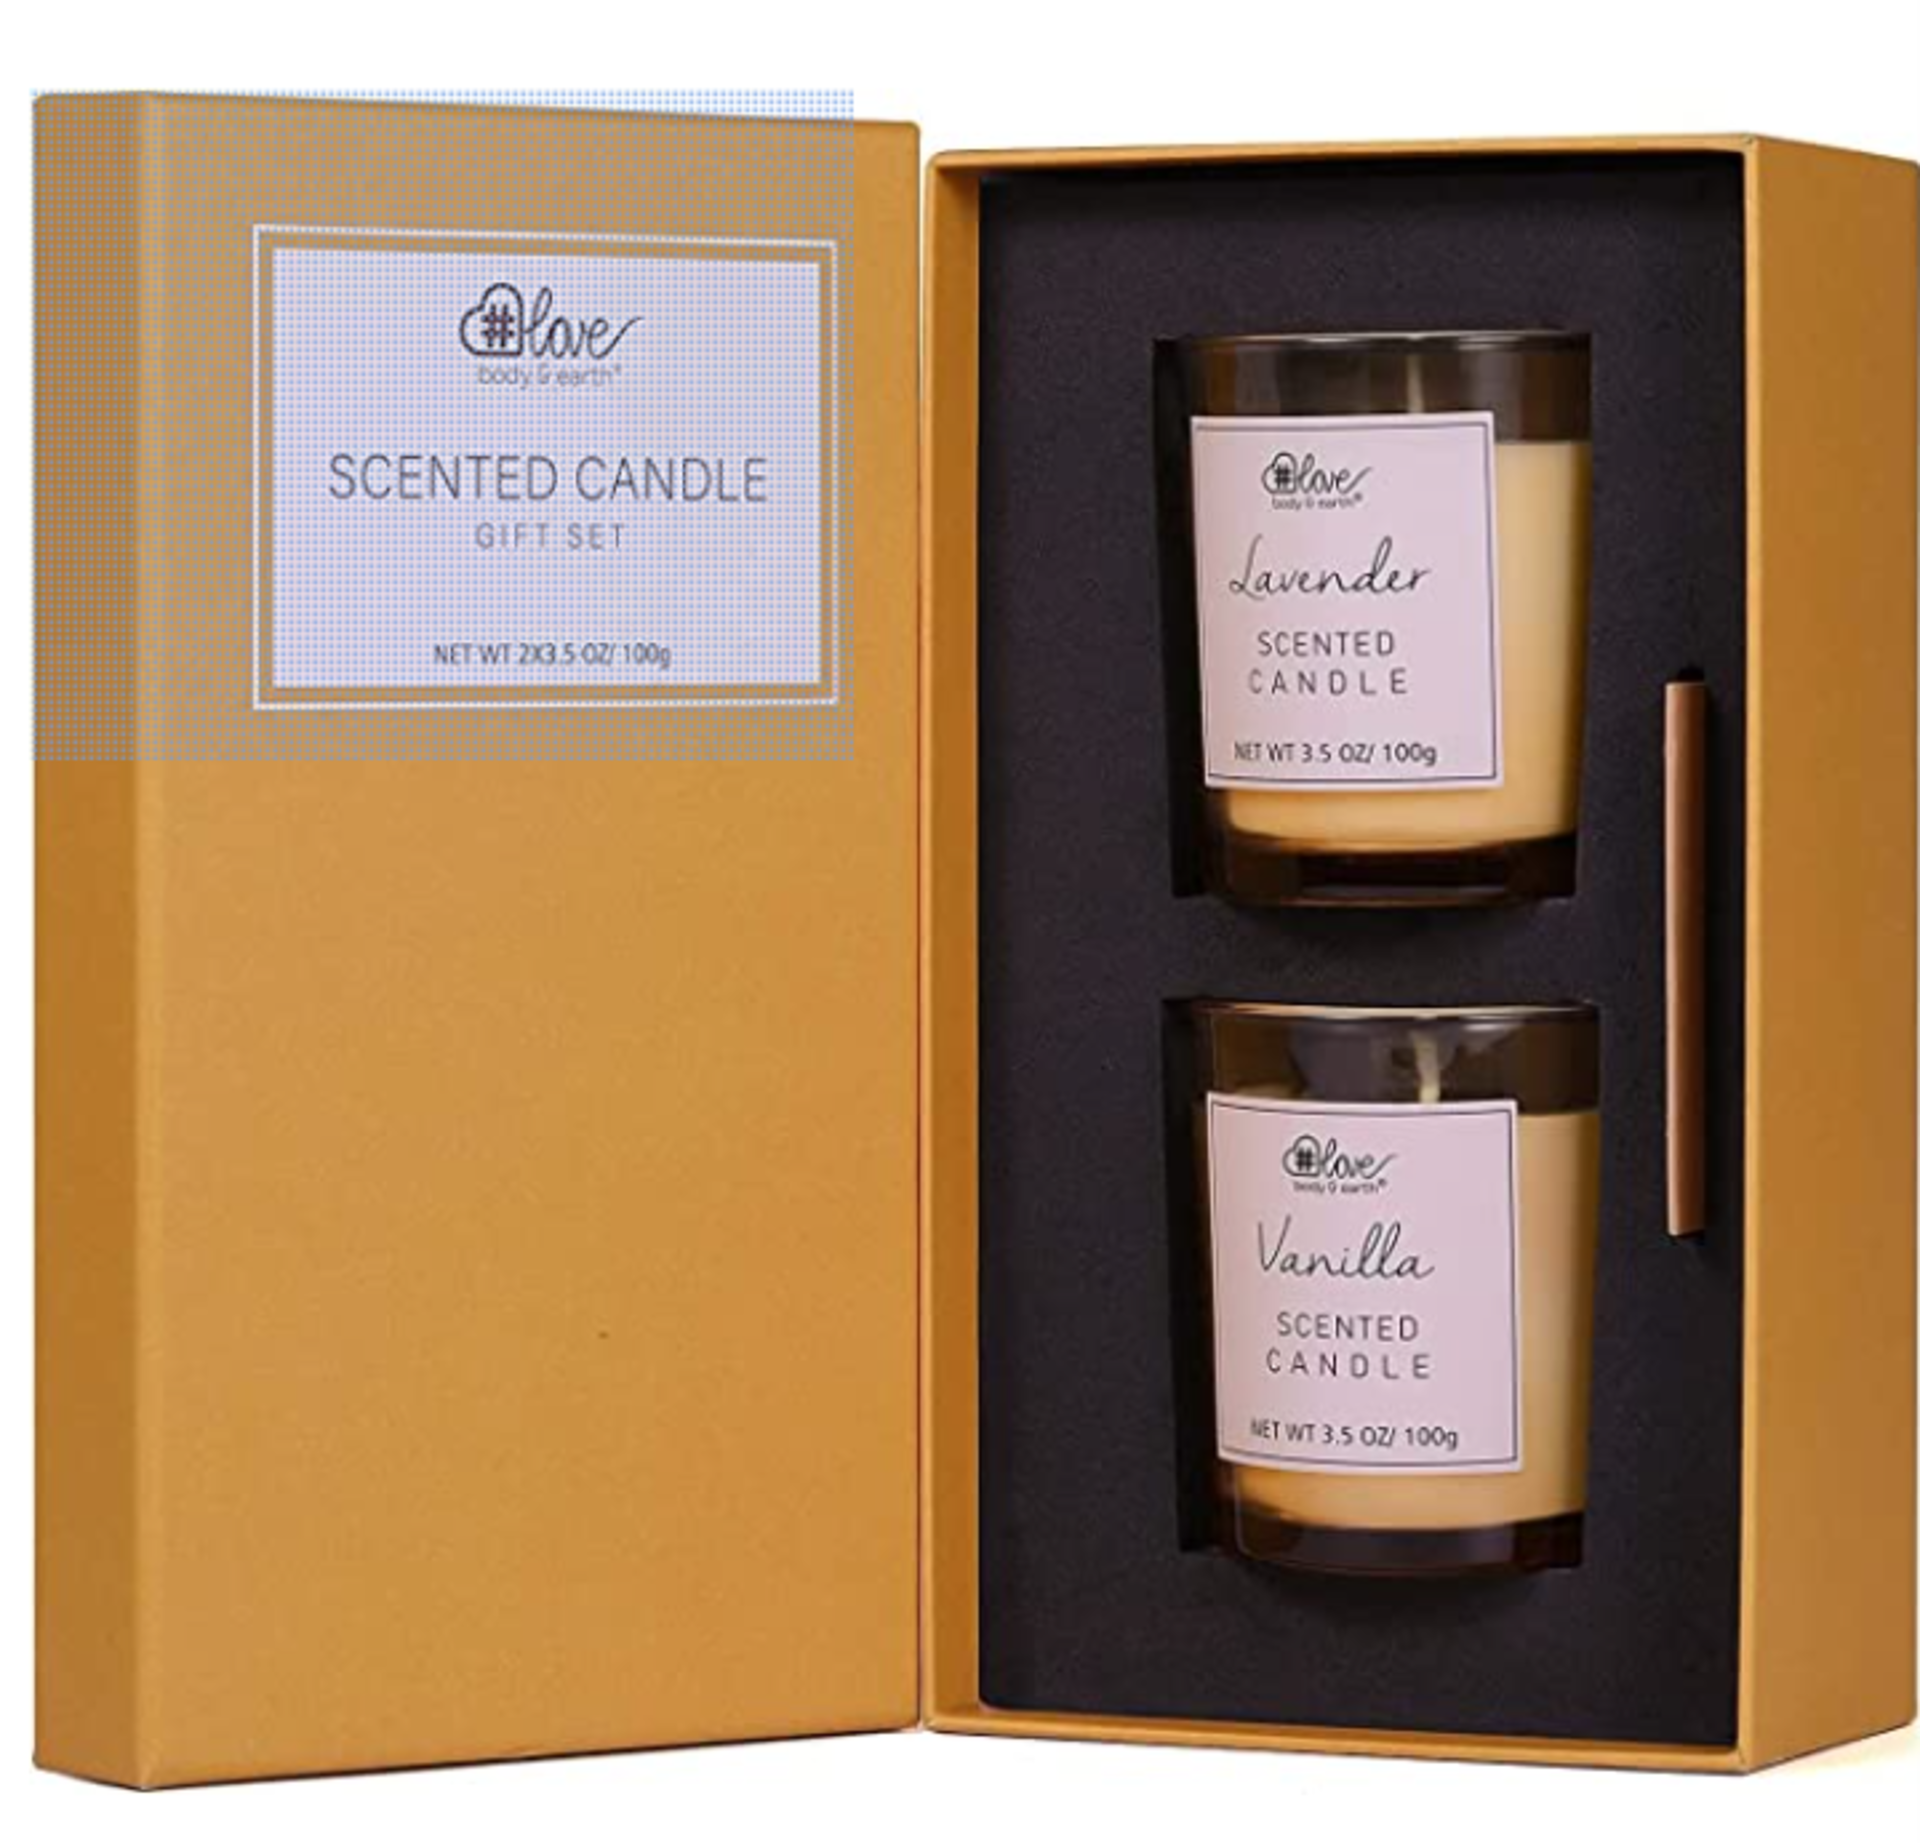 TRADE LOT 96 X NEW BOXED SETS OF 2 Body & Earth - Scented Candles Gift Set - Aromatherapy Candles